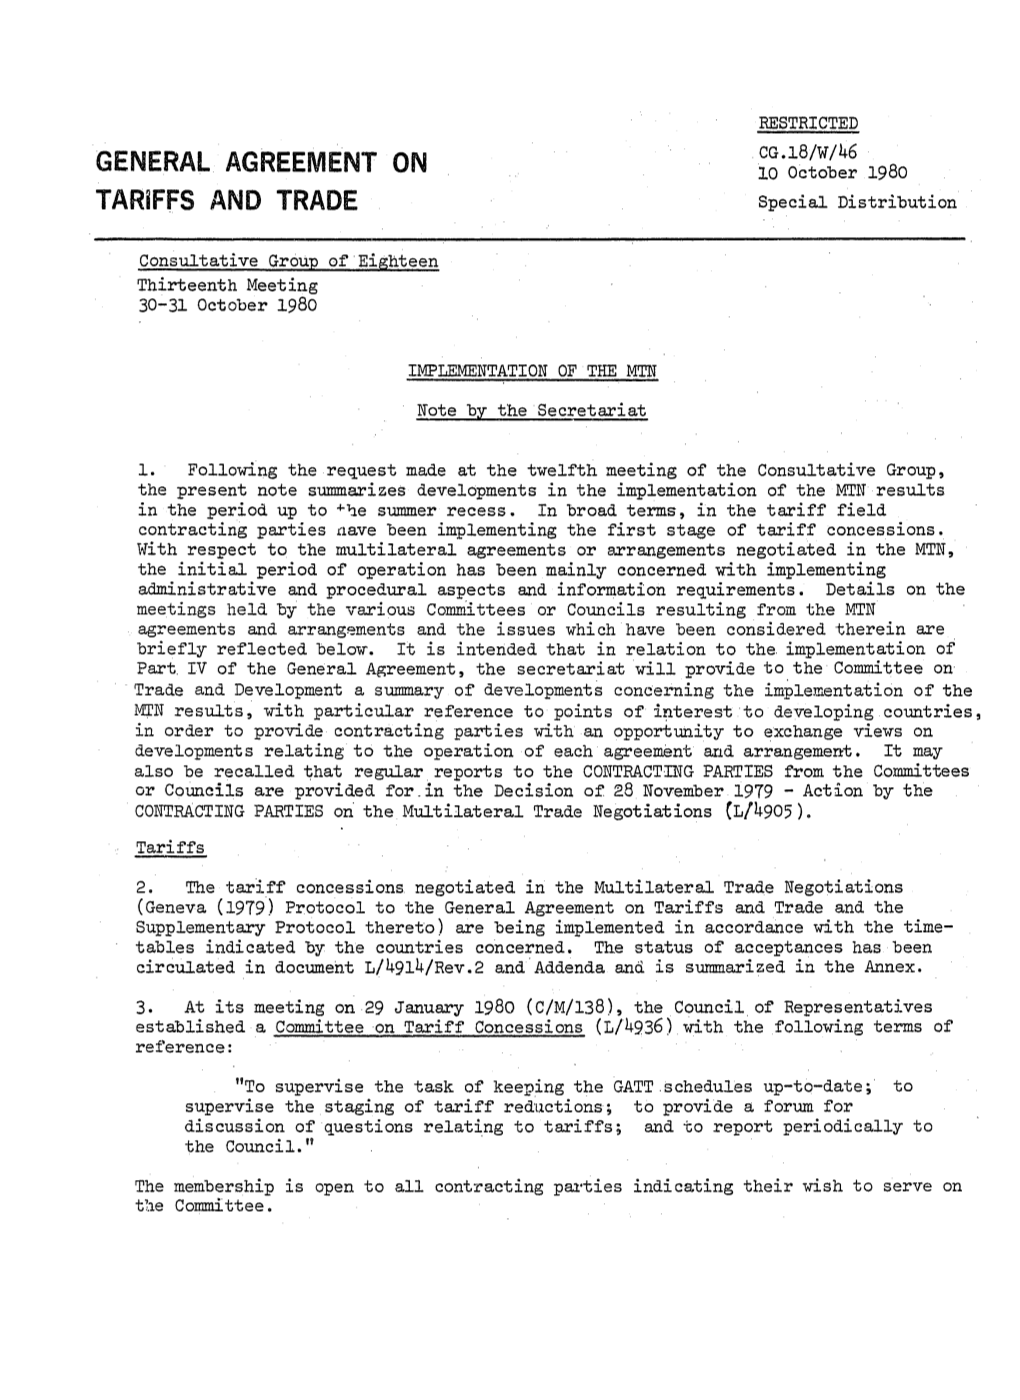 GENERAL AGREEMENT on 10 October 1980 TARIFFS and TRADE Special Distribution